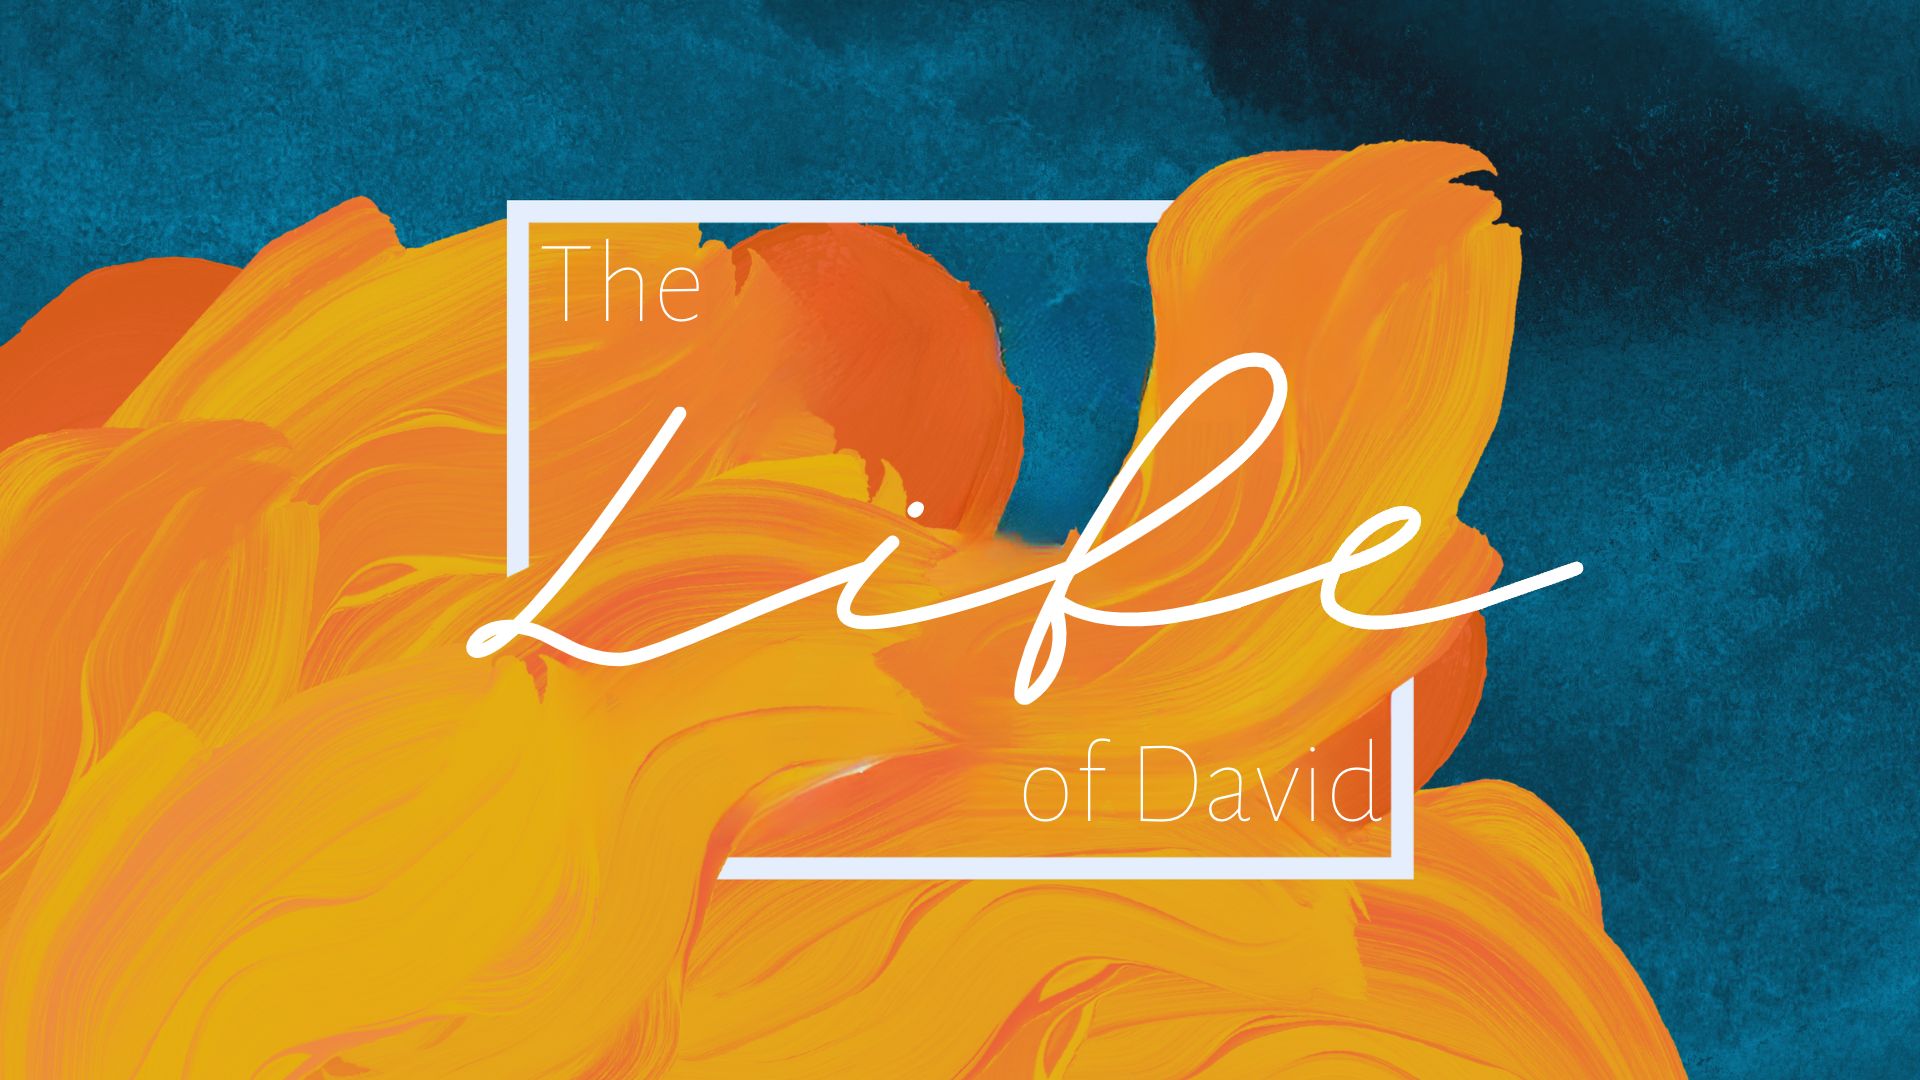 The Life of David: The Battle Belongs to the Lord